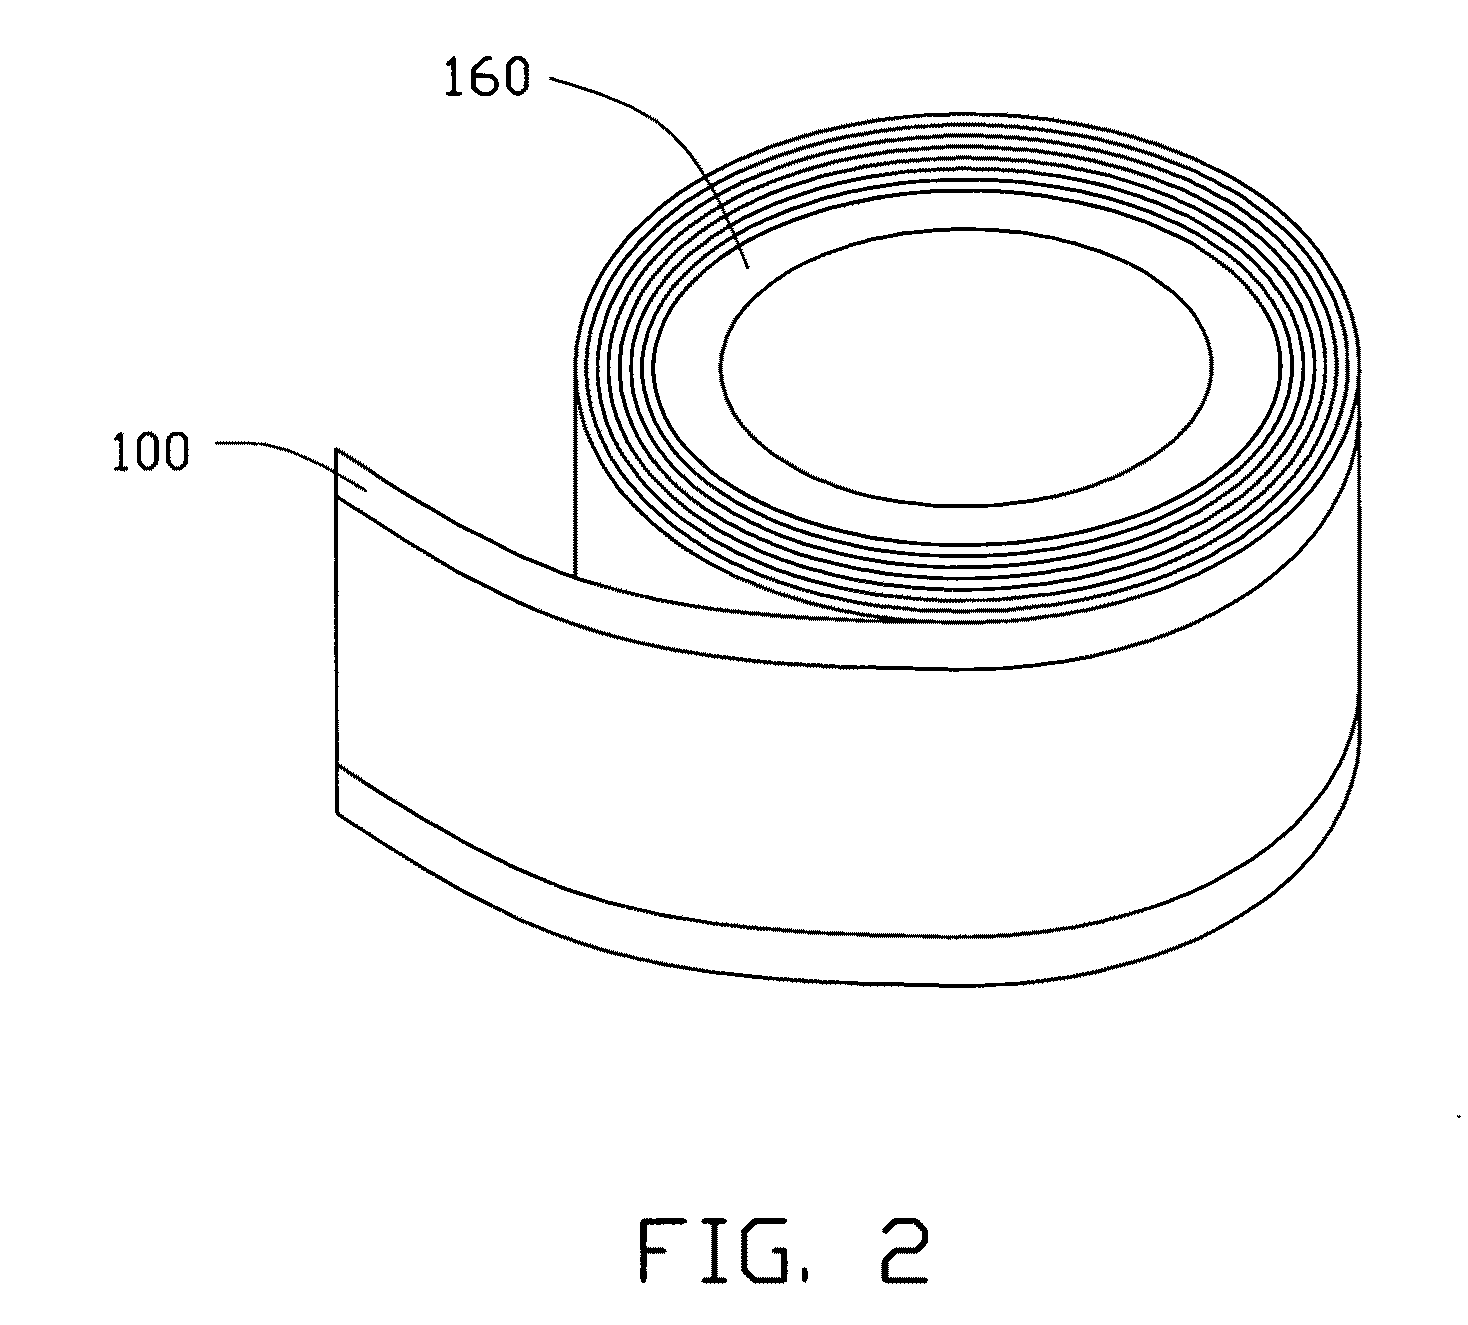 Protective device for protecting carbon nanotube film and method for making the same